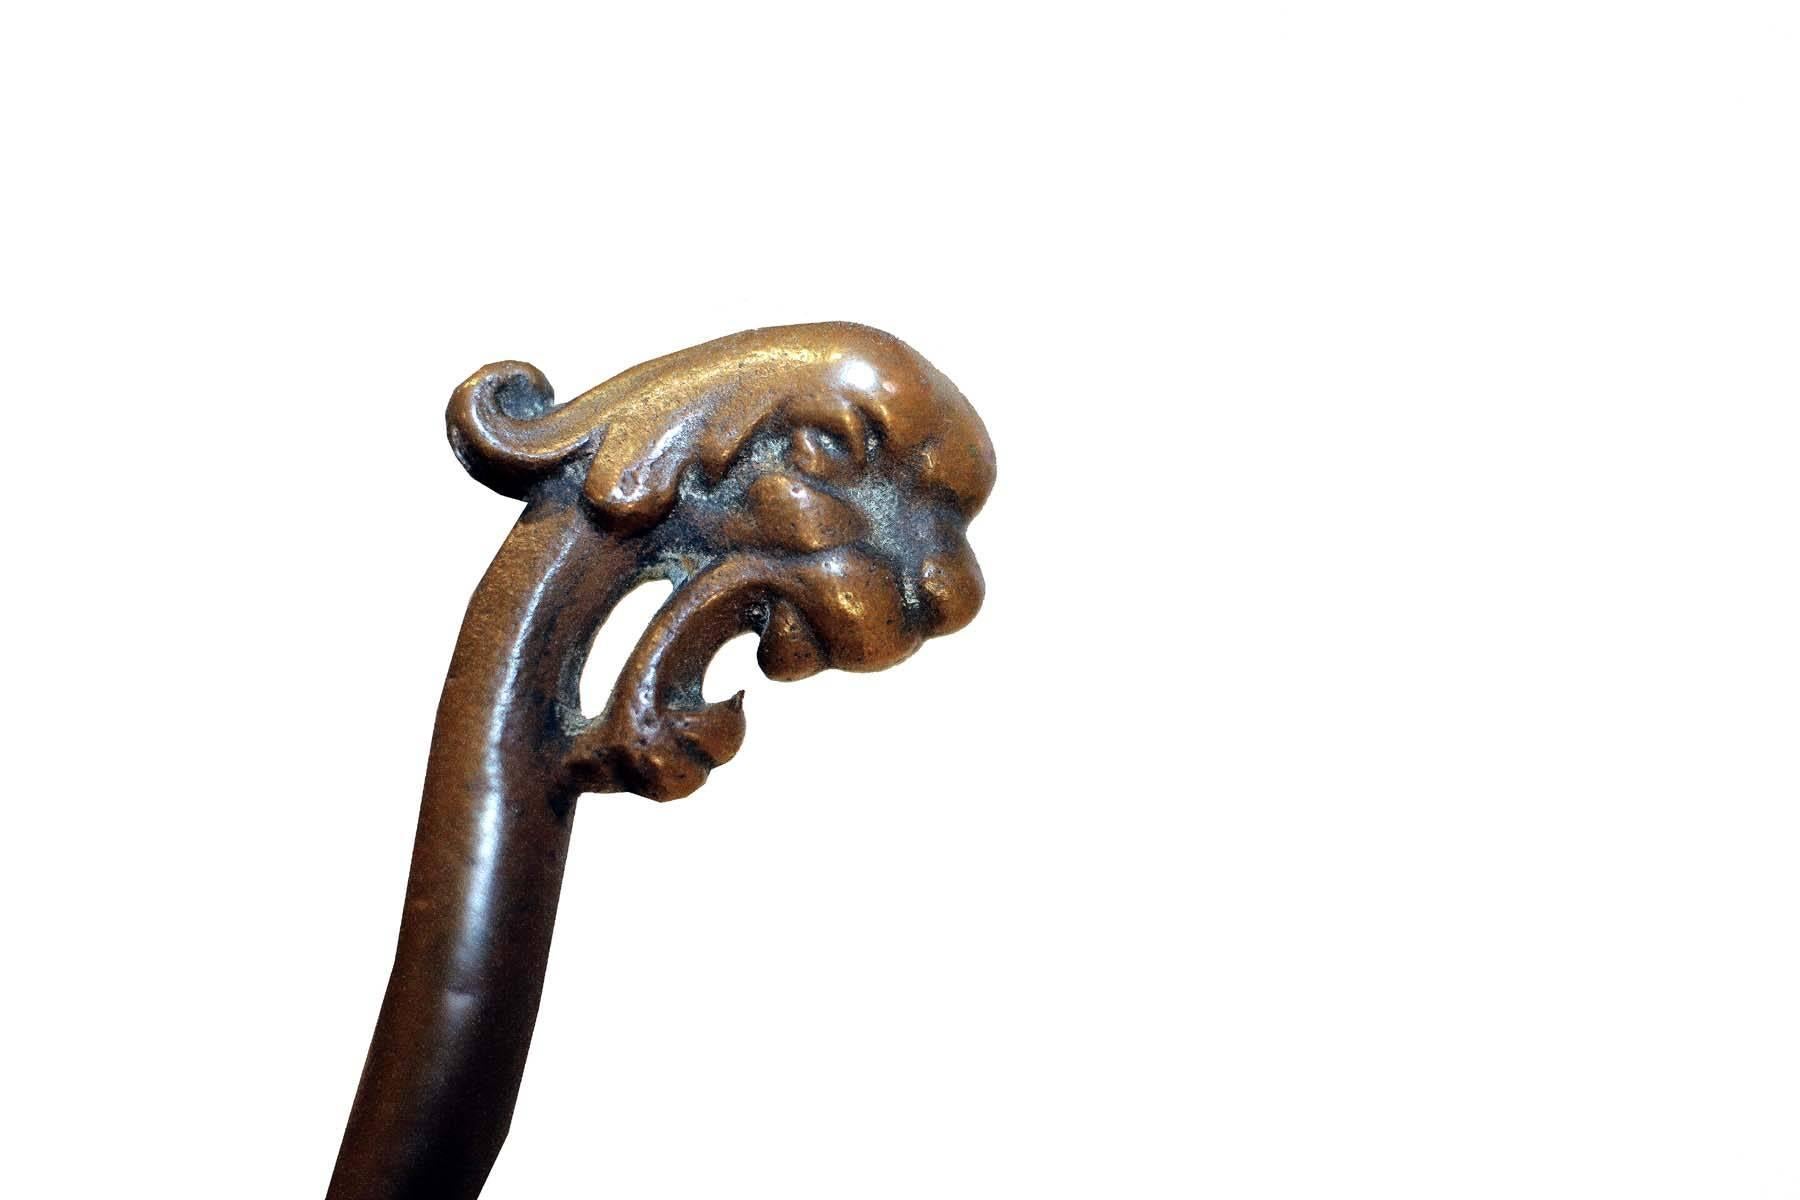 An amazing Victorian had/coat rack, sturdy with breathtaking details. The dragons head ends and the claw feet set this piece apart from your average coat rack. An ecclesiastic piece it lived a large part of its life in a church setting.